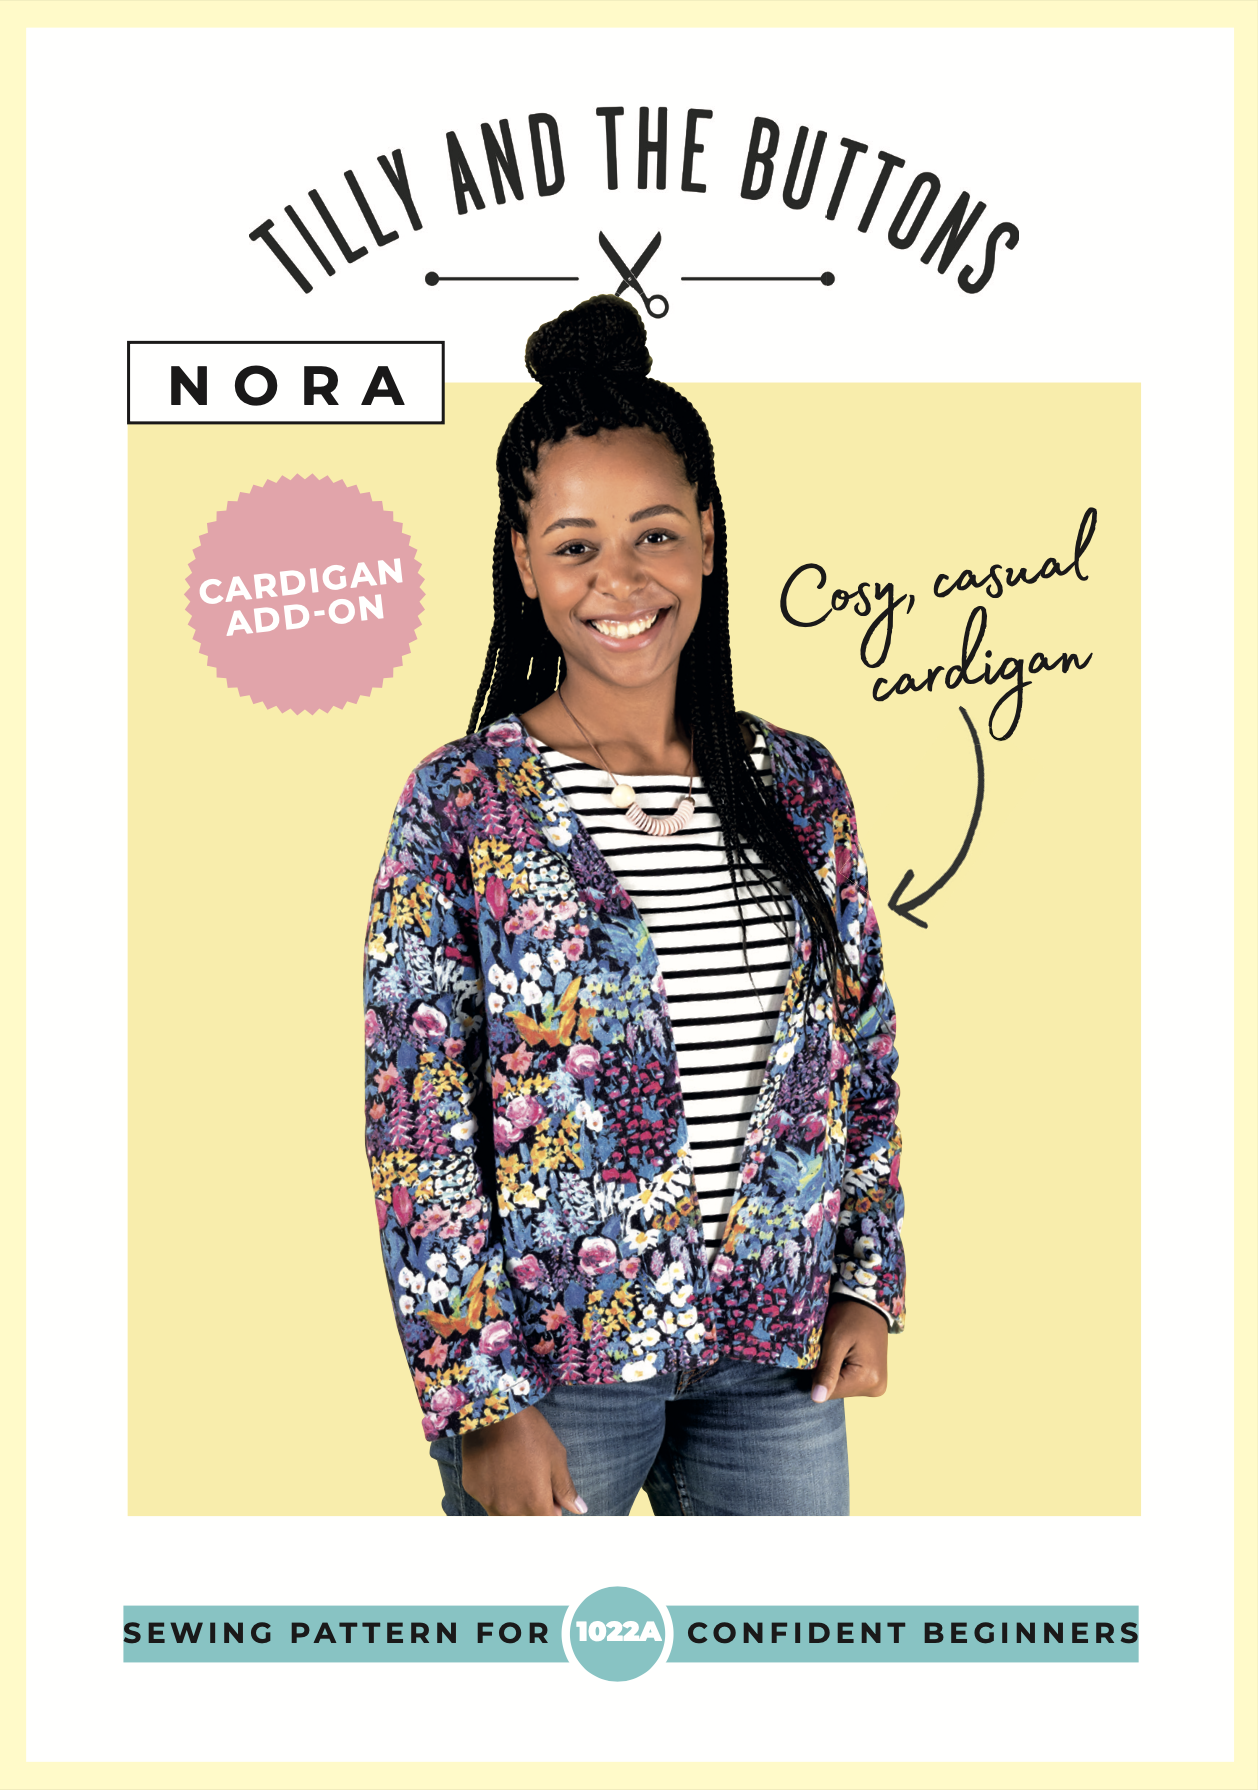 Tilly and the Buttons Nora Cardigan Add-on